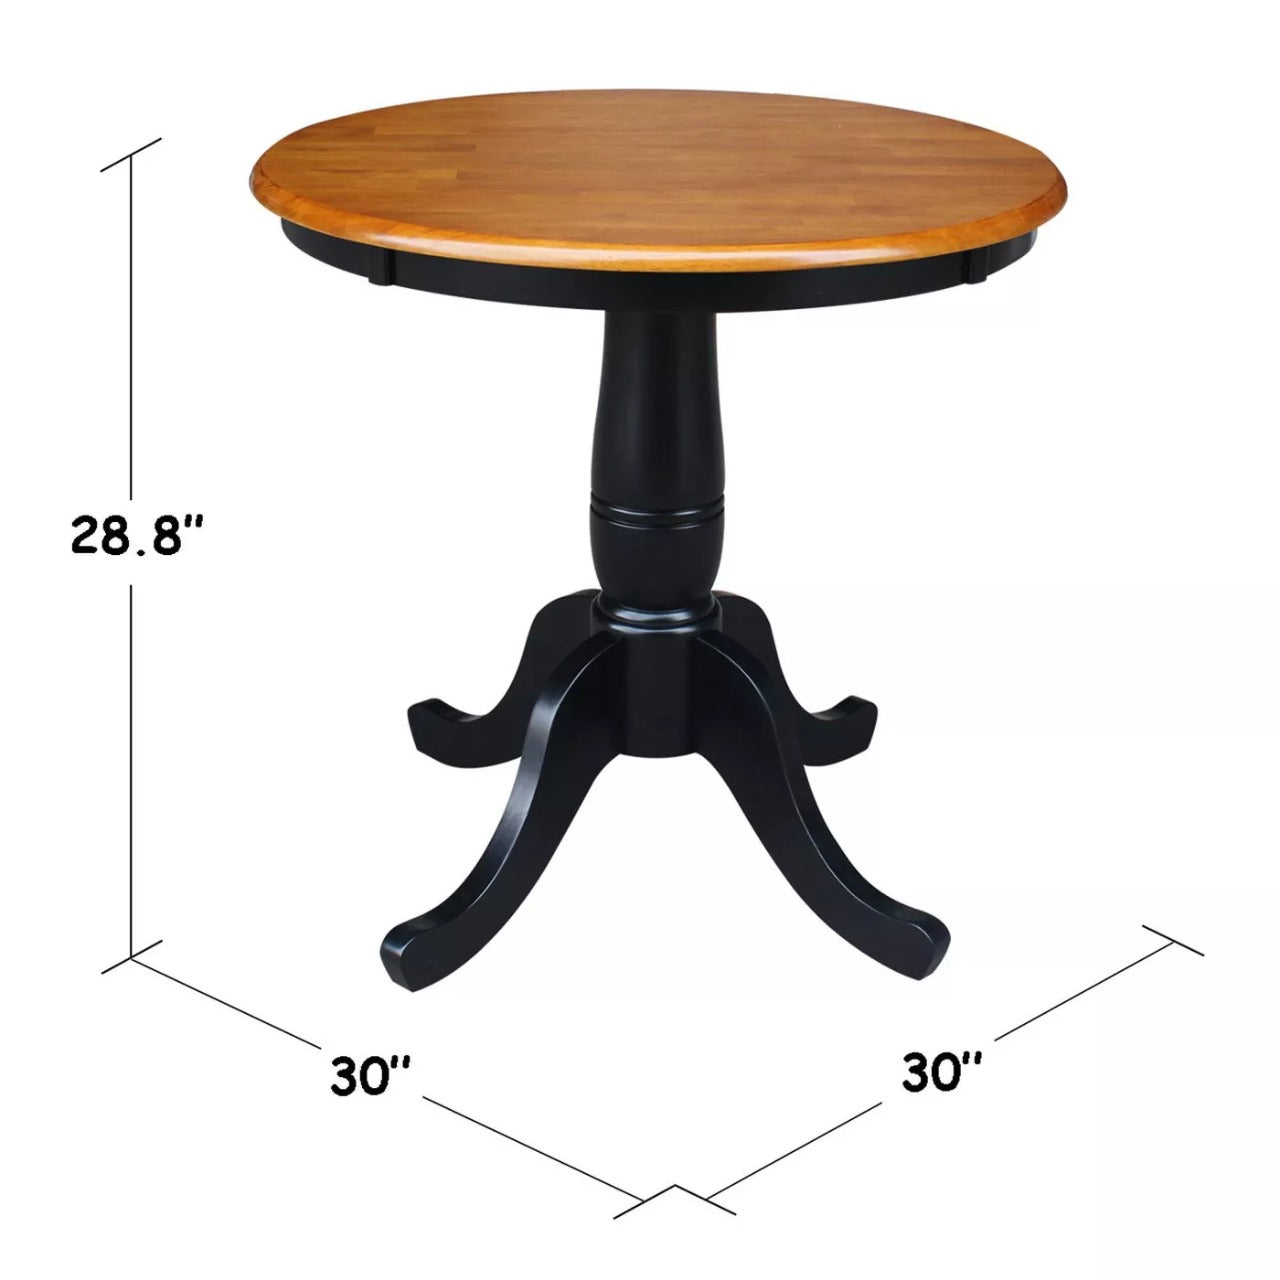 Dining Set 3 Piece Round Dining Table with 2 X-Back Chairs